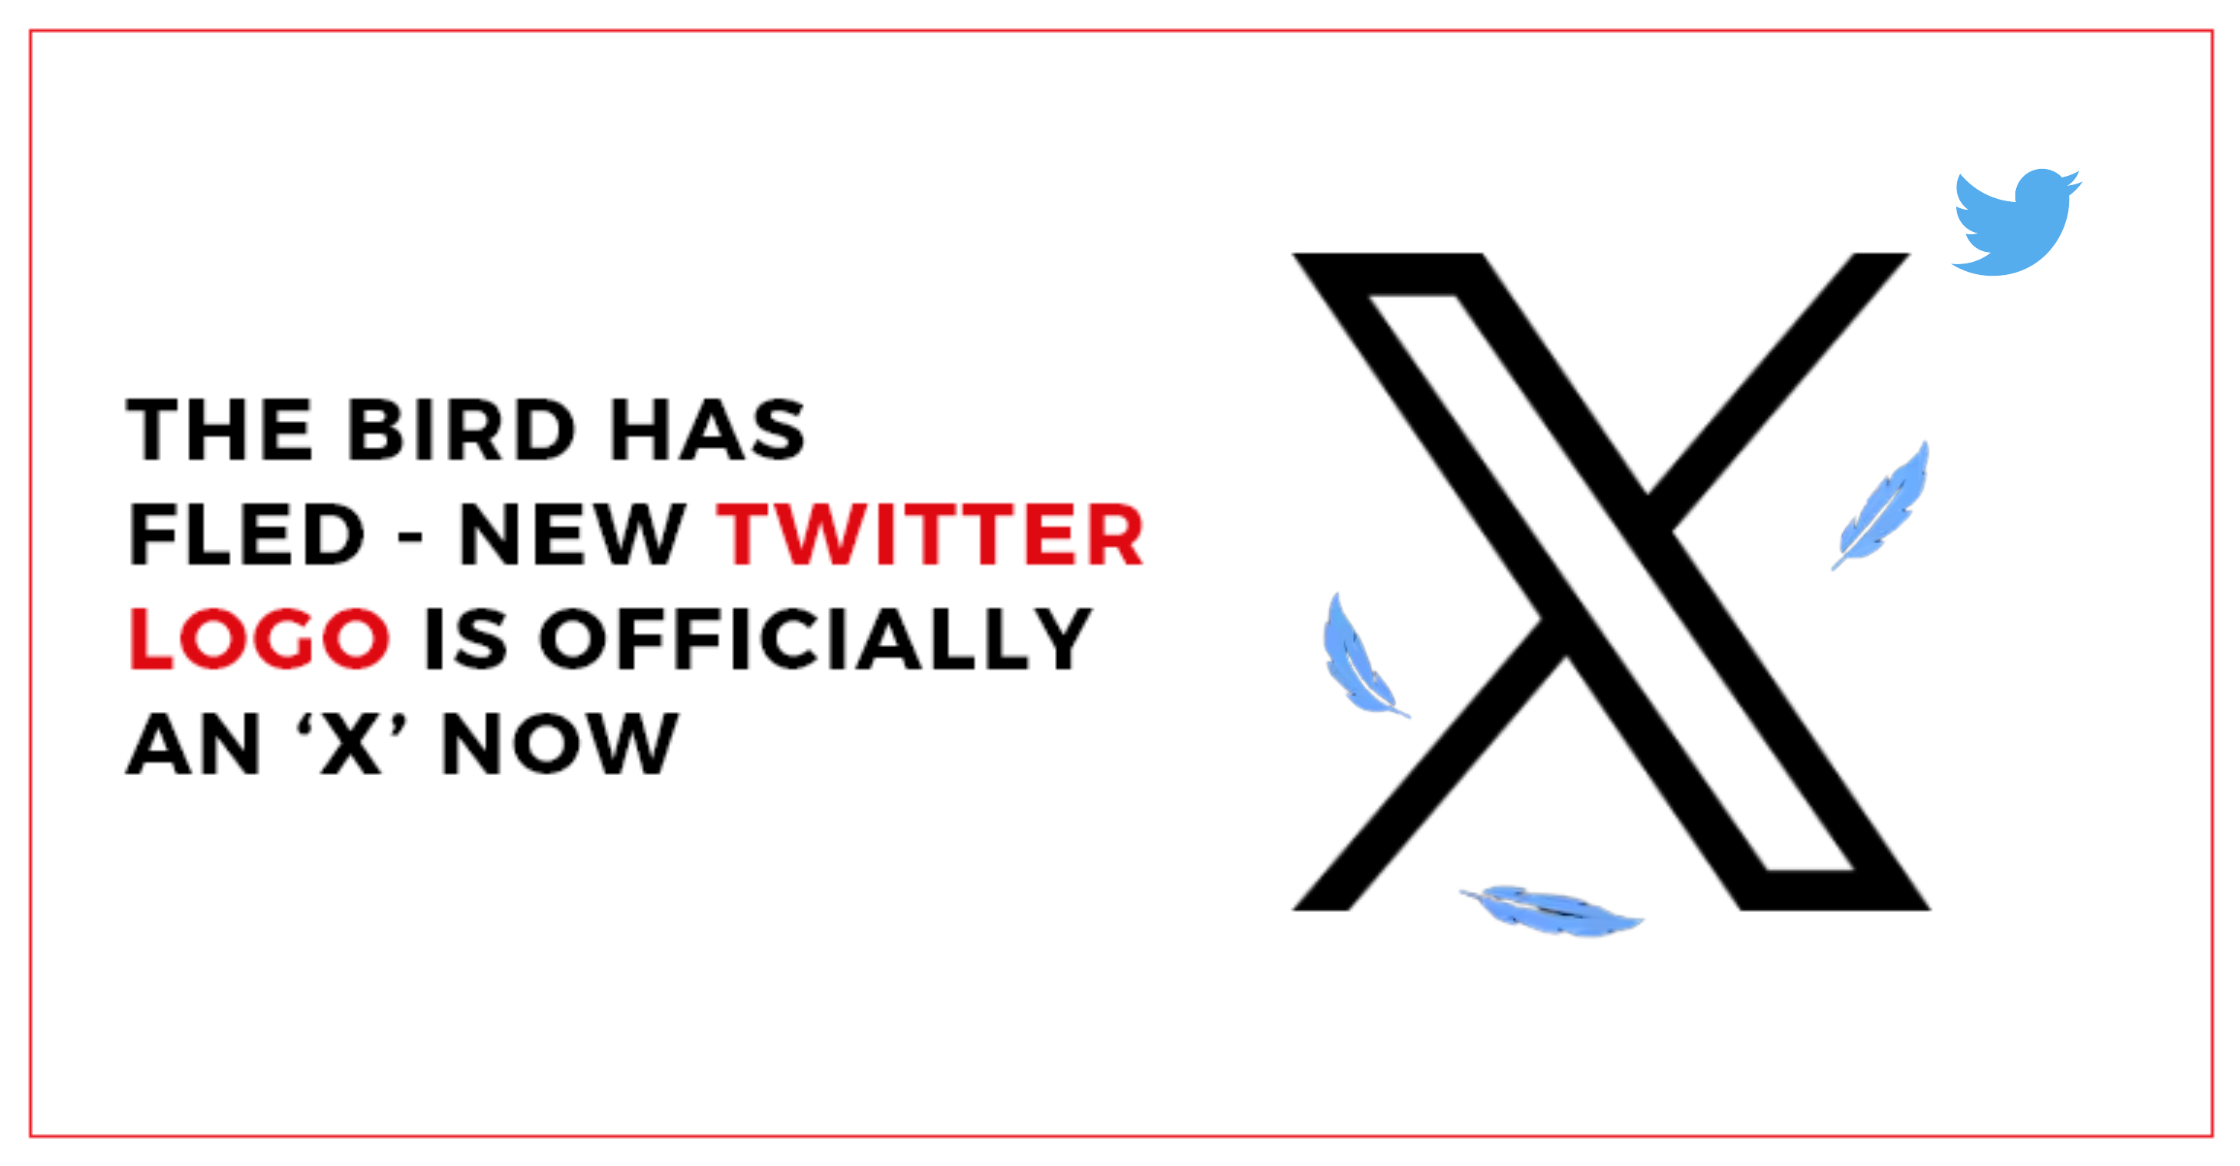 new twitter logo is X now